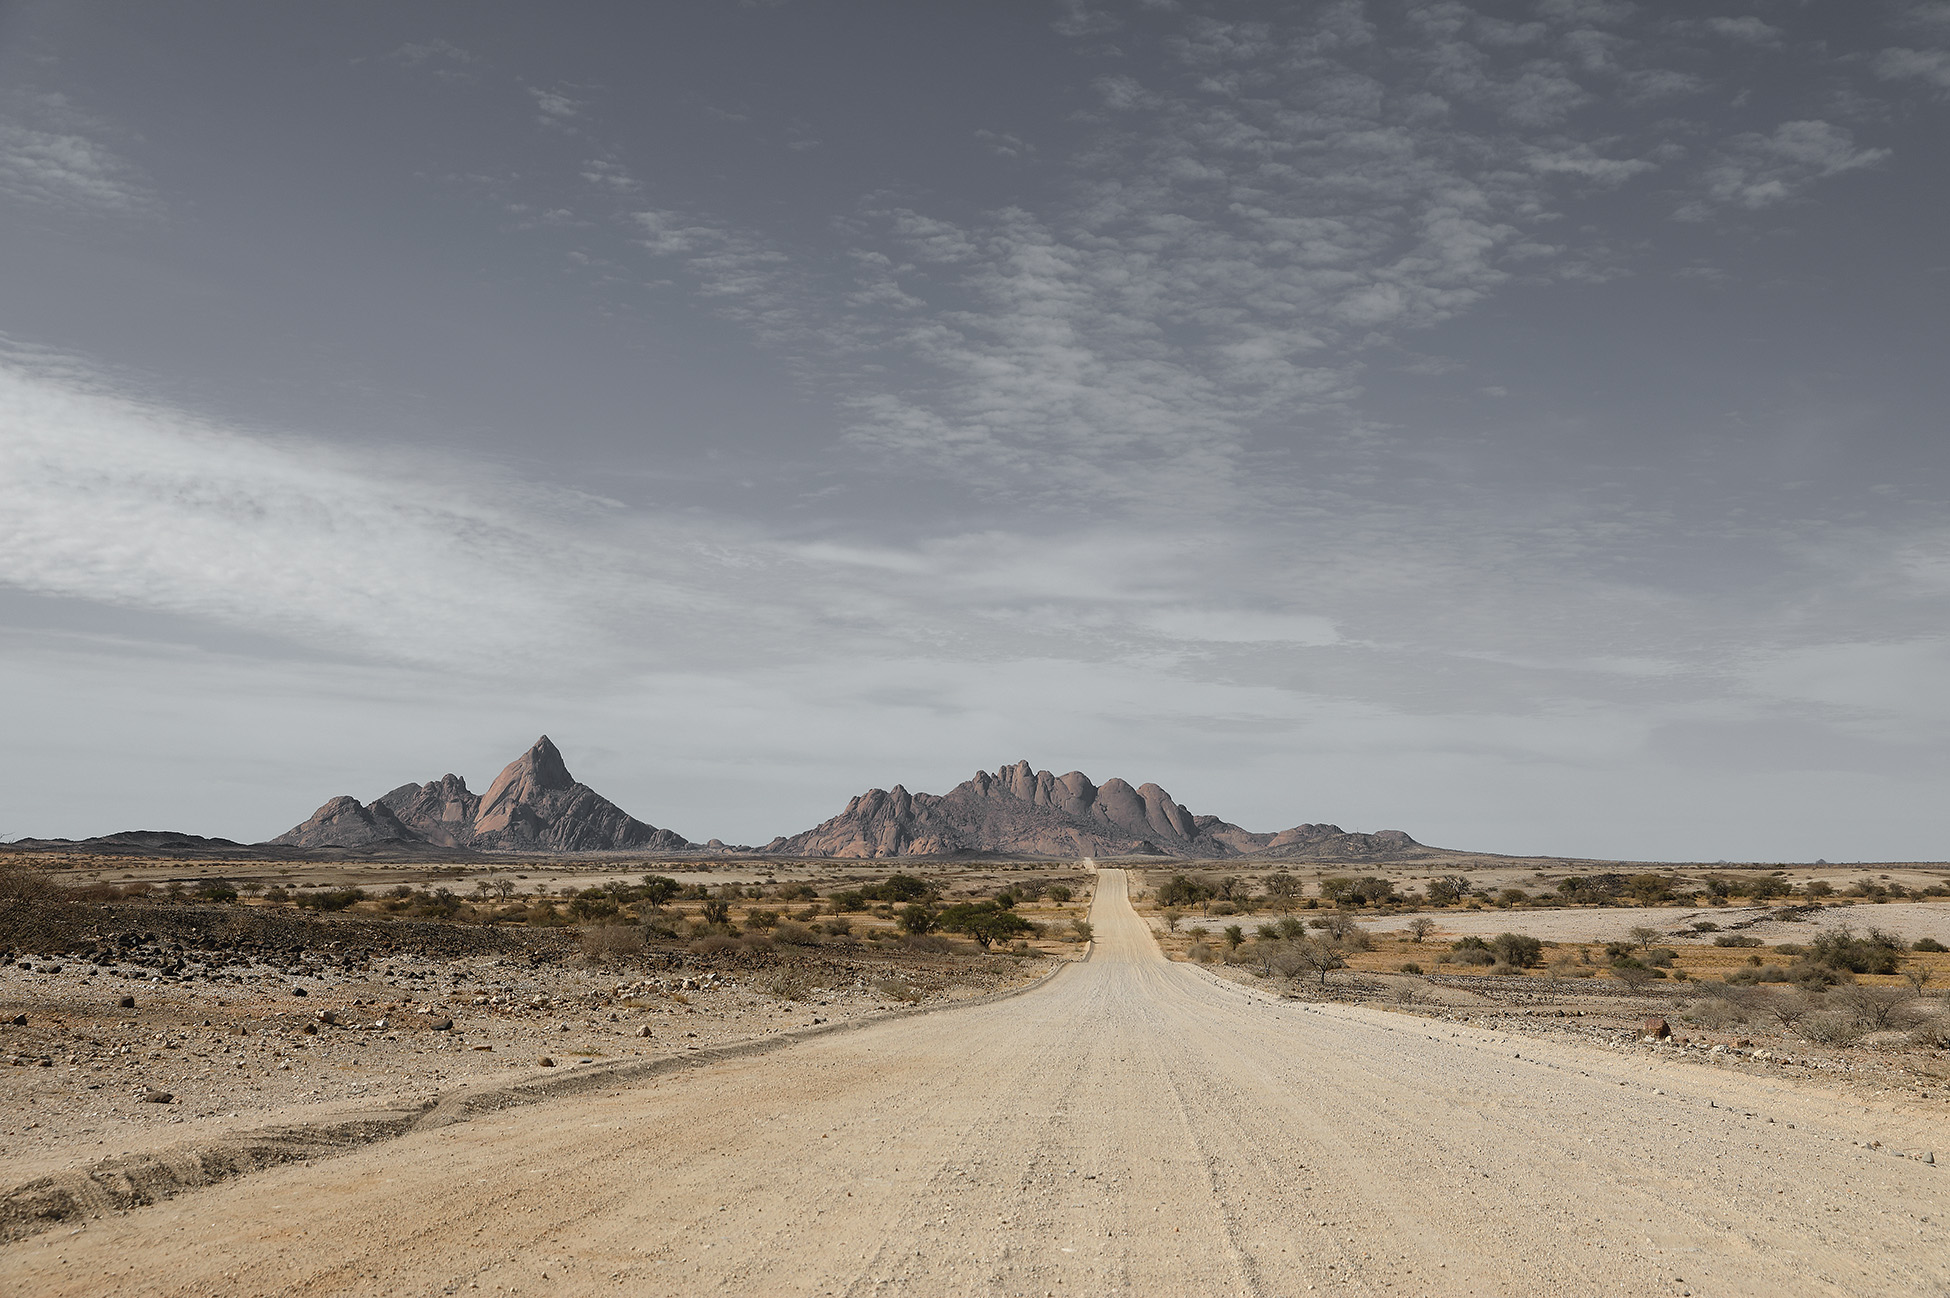 These long endless roads stretching into the desert, always with a beauty and always to a point. The roads in Namibia were exceptionally maintained. It made travel times manageable when one could ply these roads at good speeds.